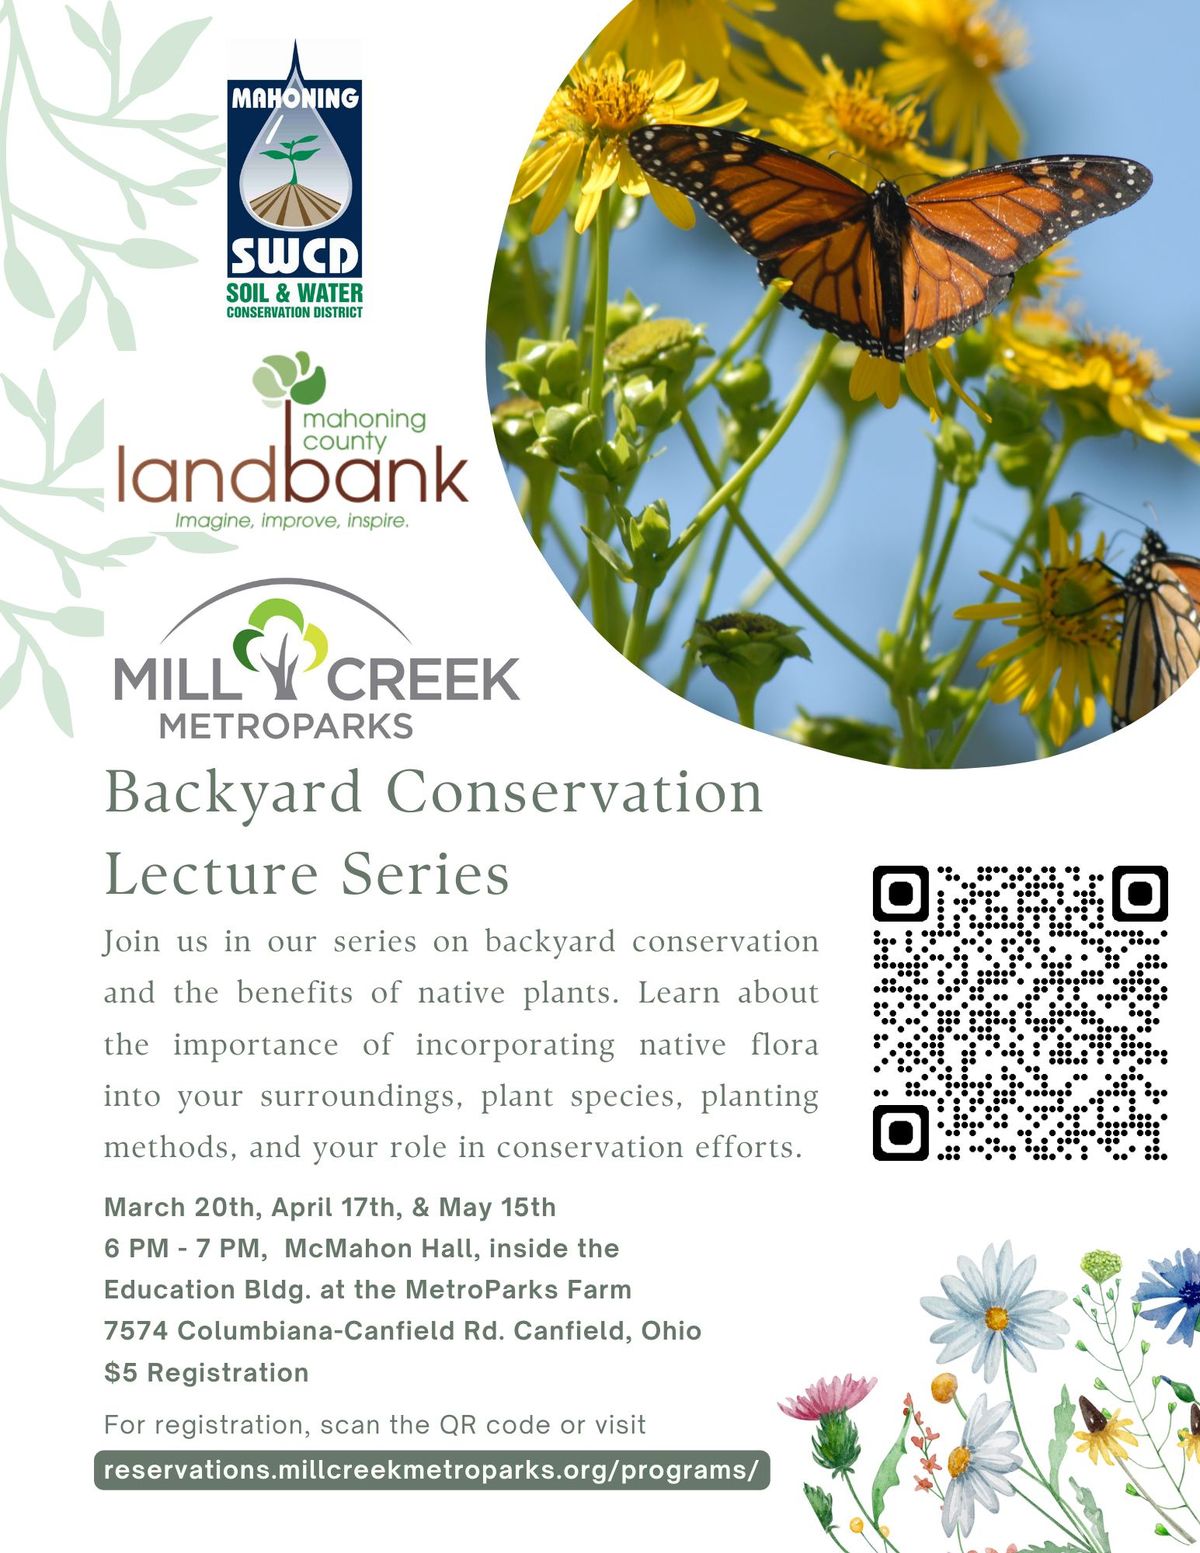 Backyard Conservation Lecture Series: Practical Conservation Techniques in Action